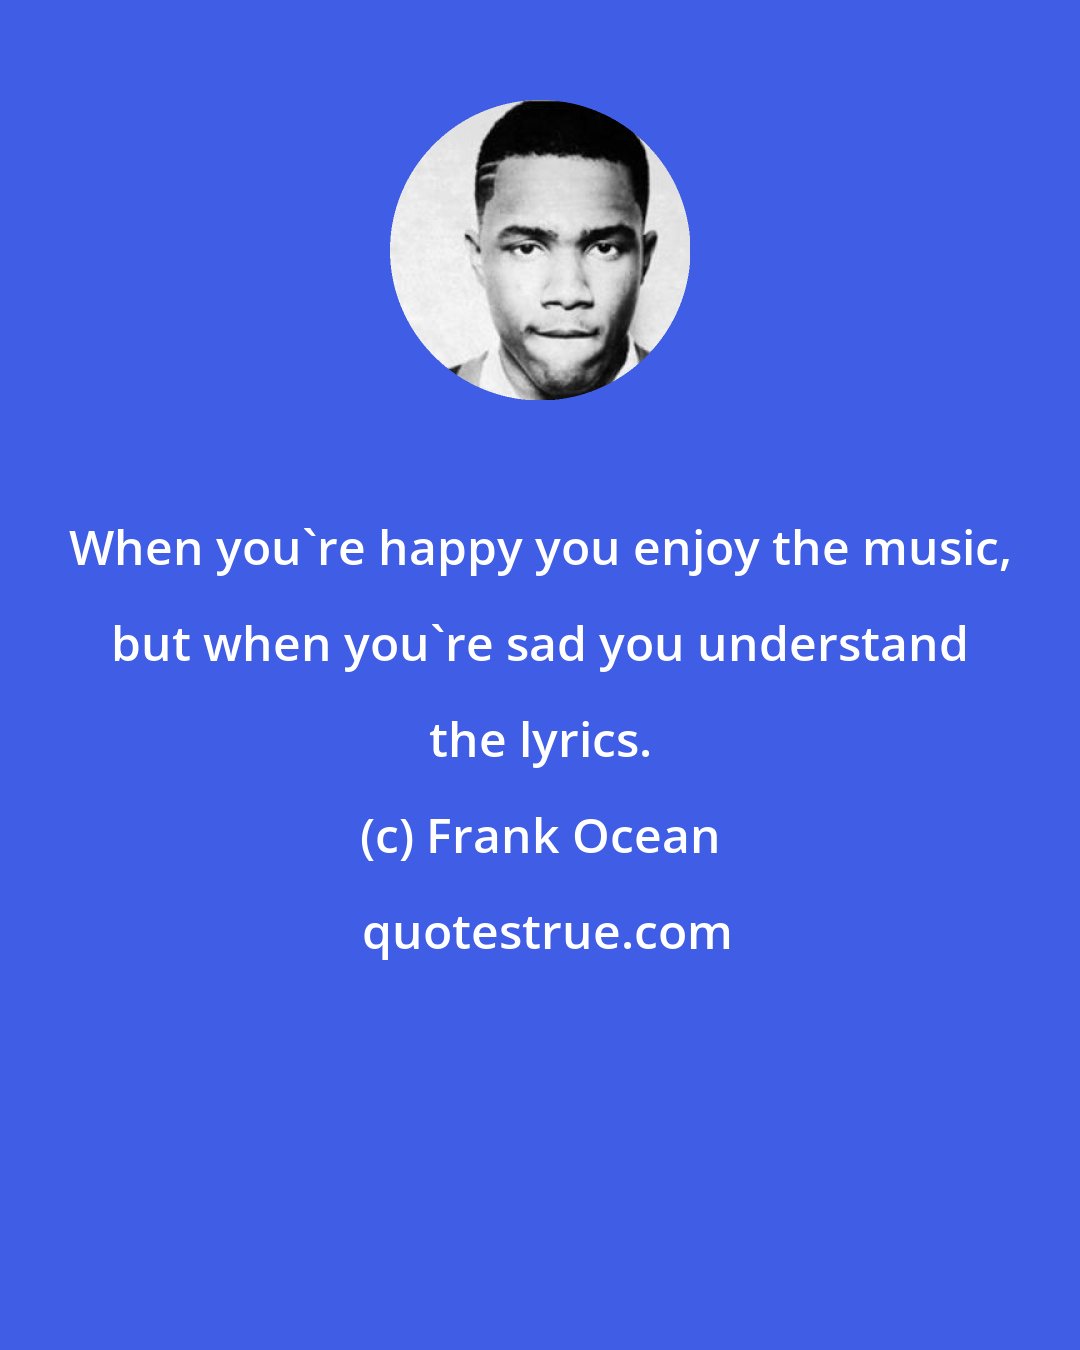 Frank Ocean: When you're happy you enjoy the music, but when you're sad you understand the lyrics.